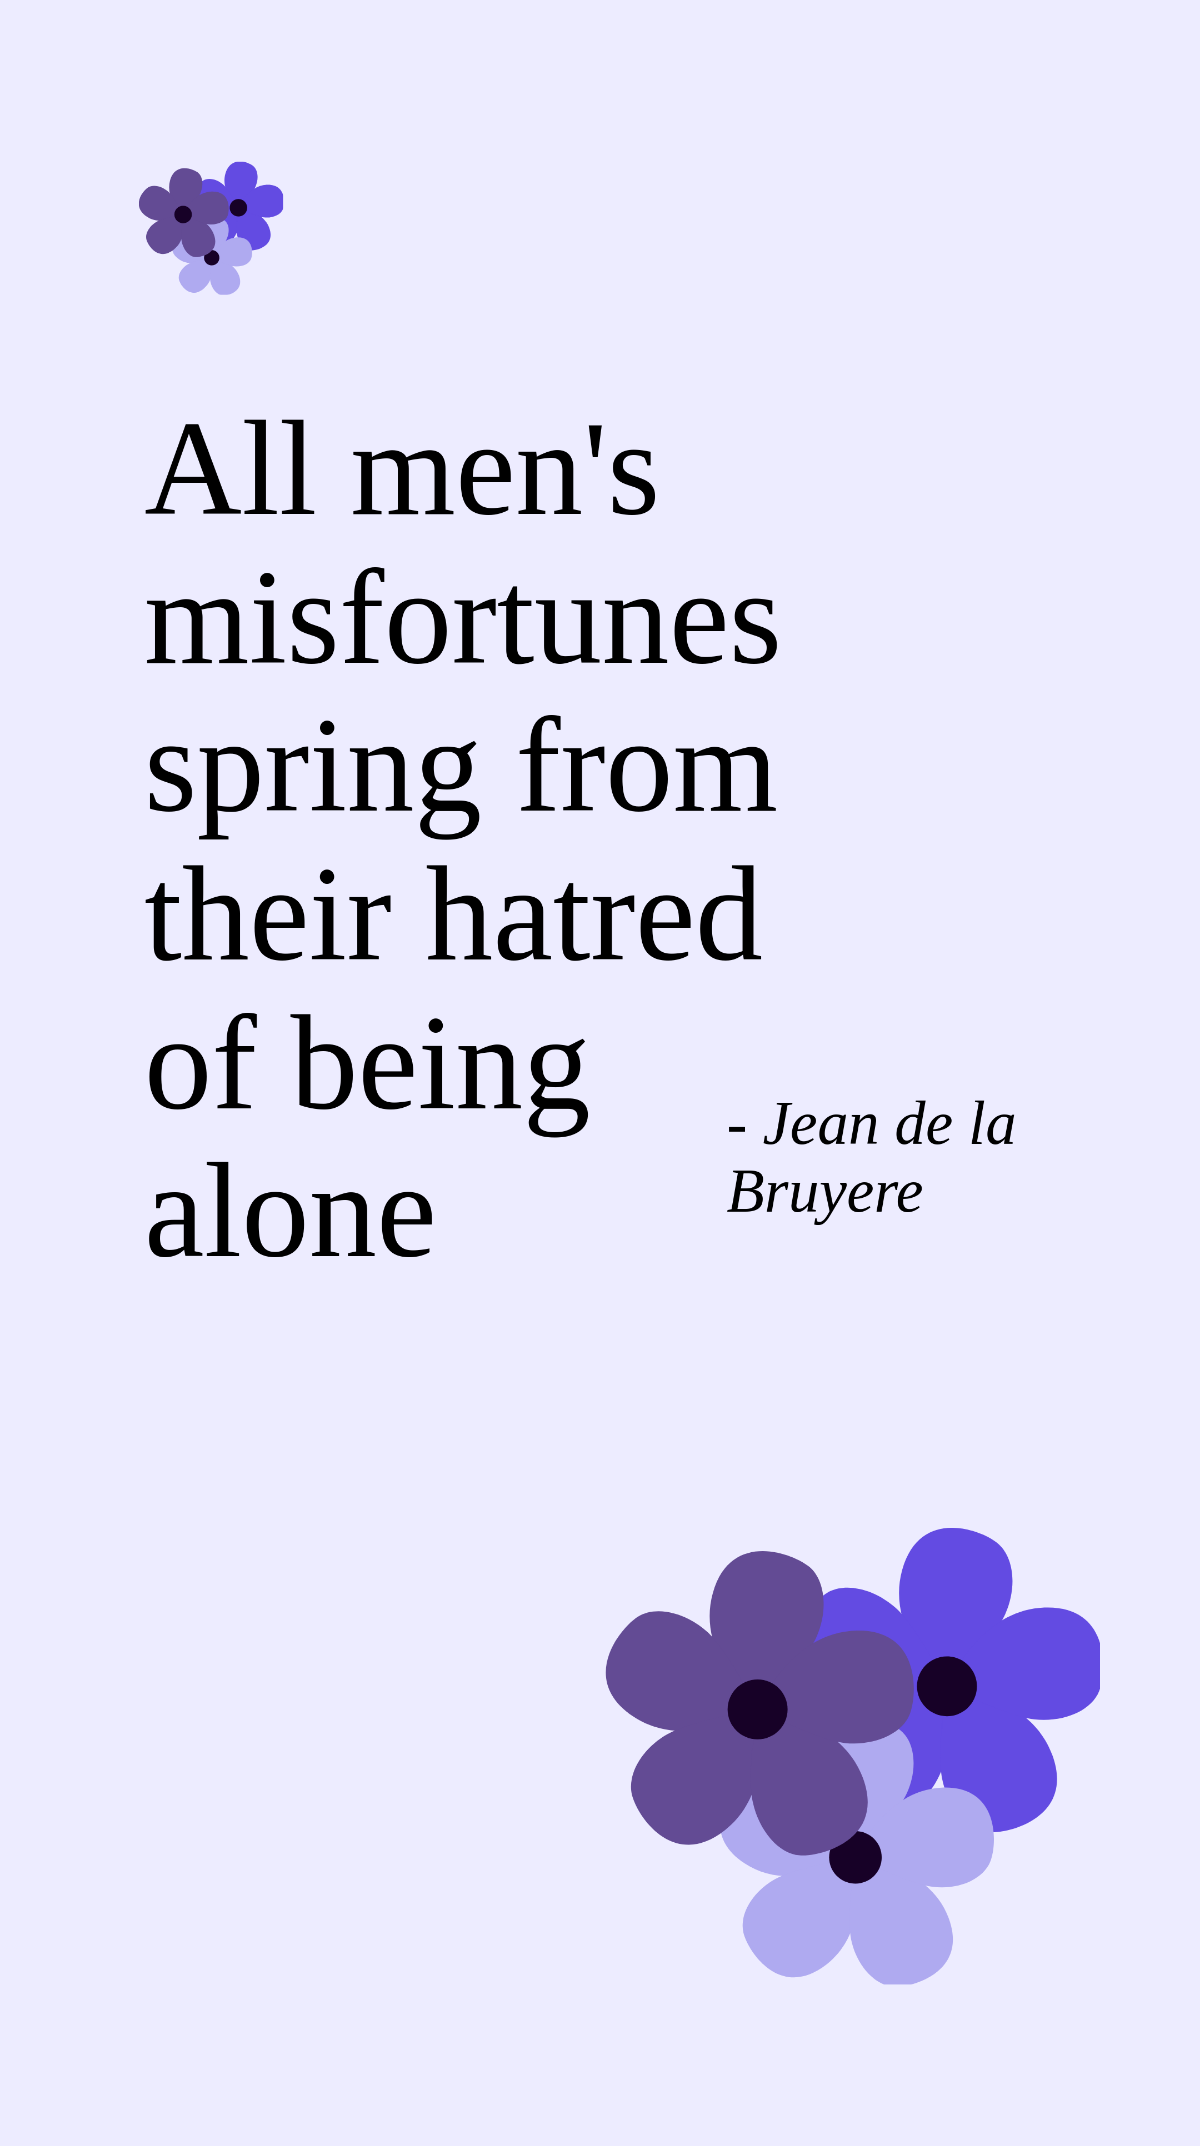 Jean de la Bruyere - All men's misfortunes spring from their hatred of being alone Template